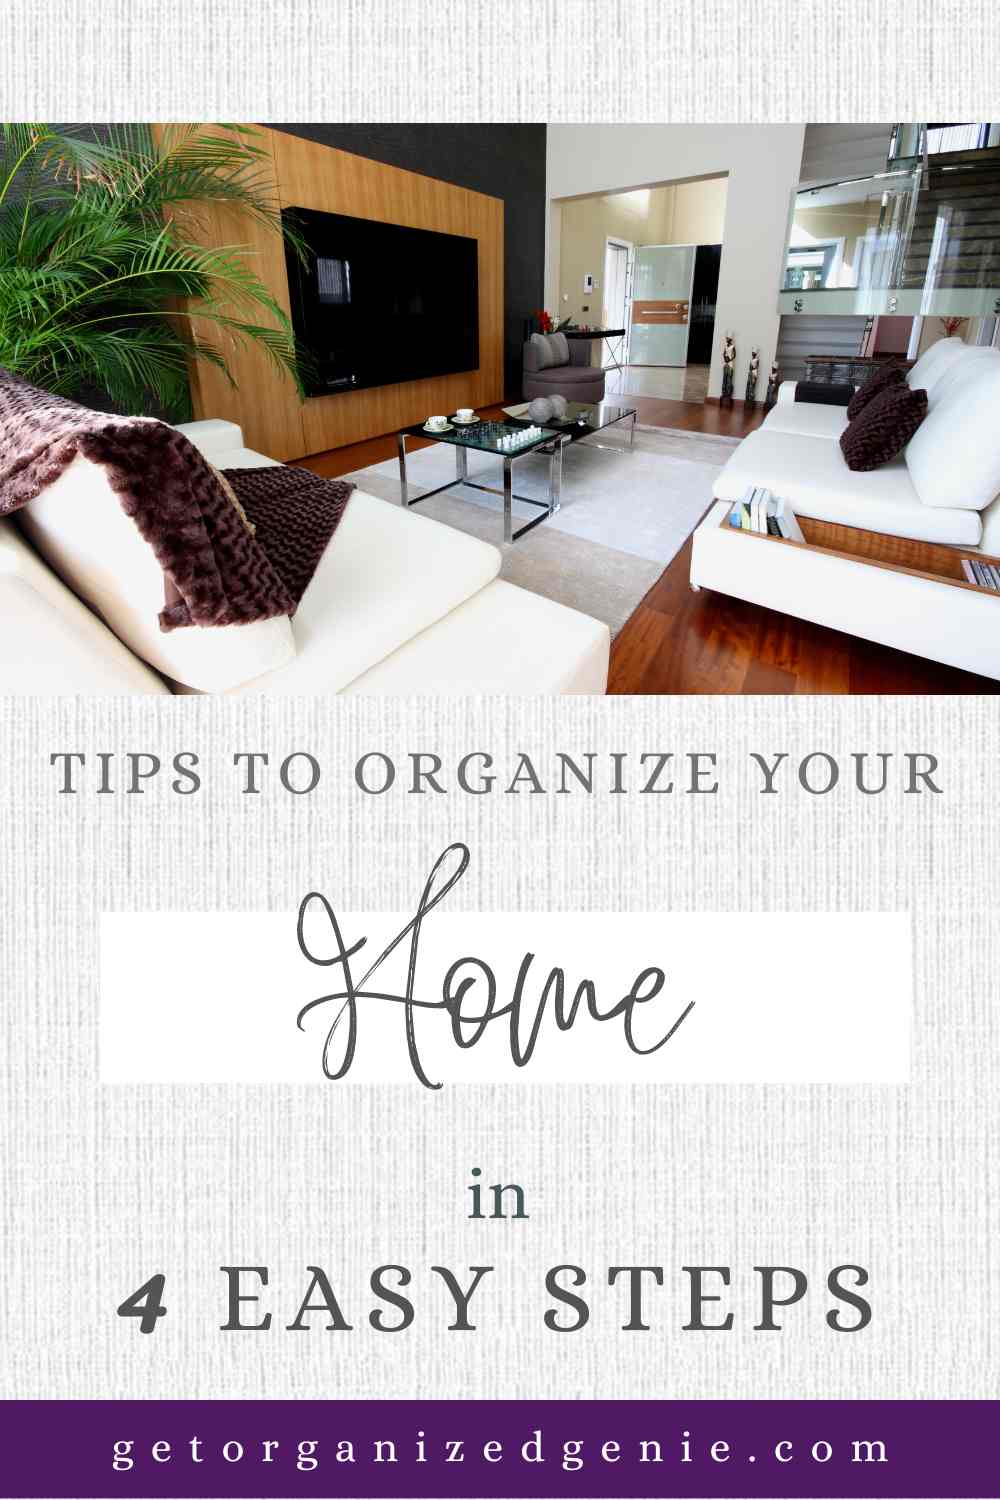 Everything You Need to Organize Your Home (Room by Room) - A